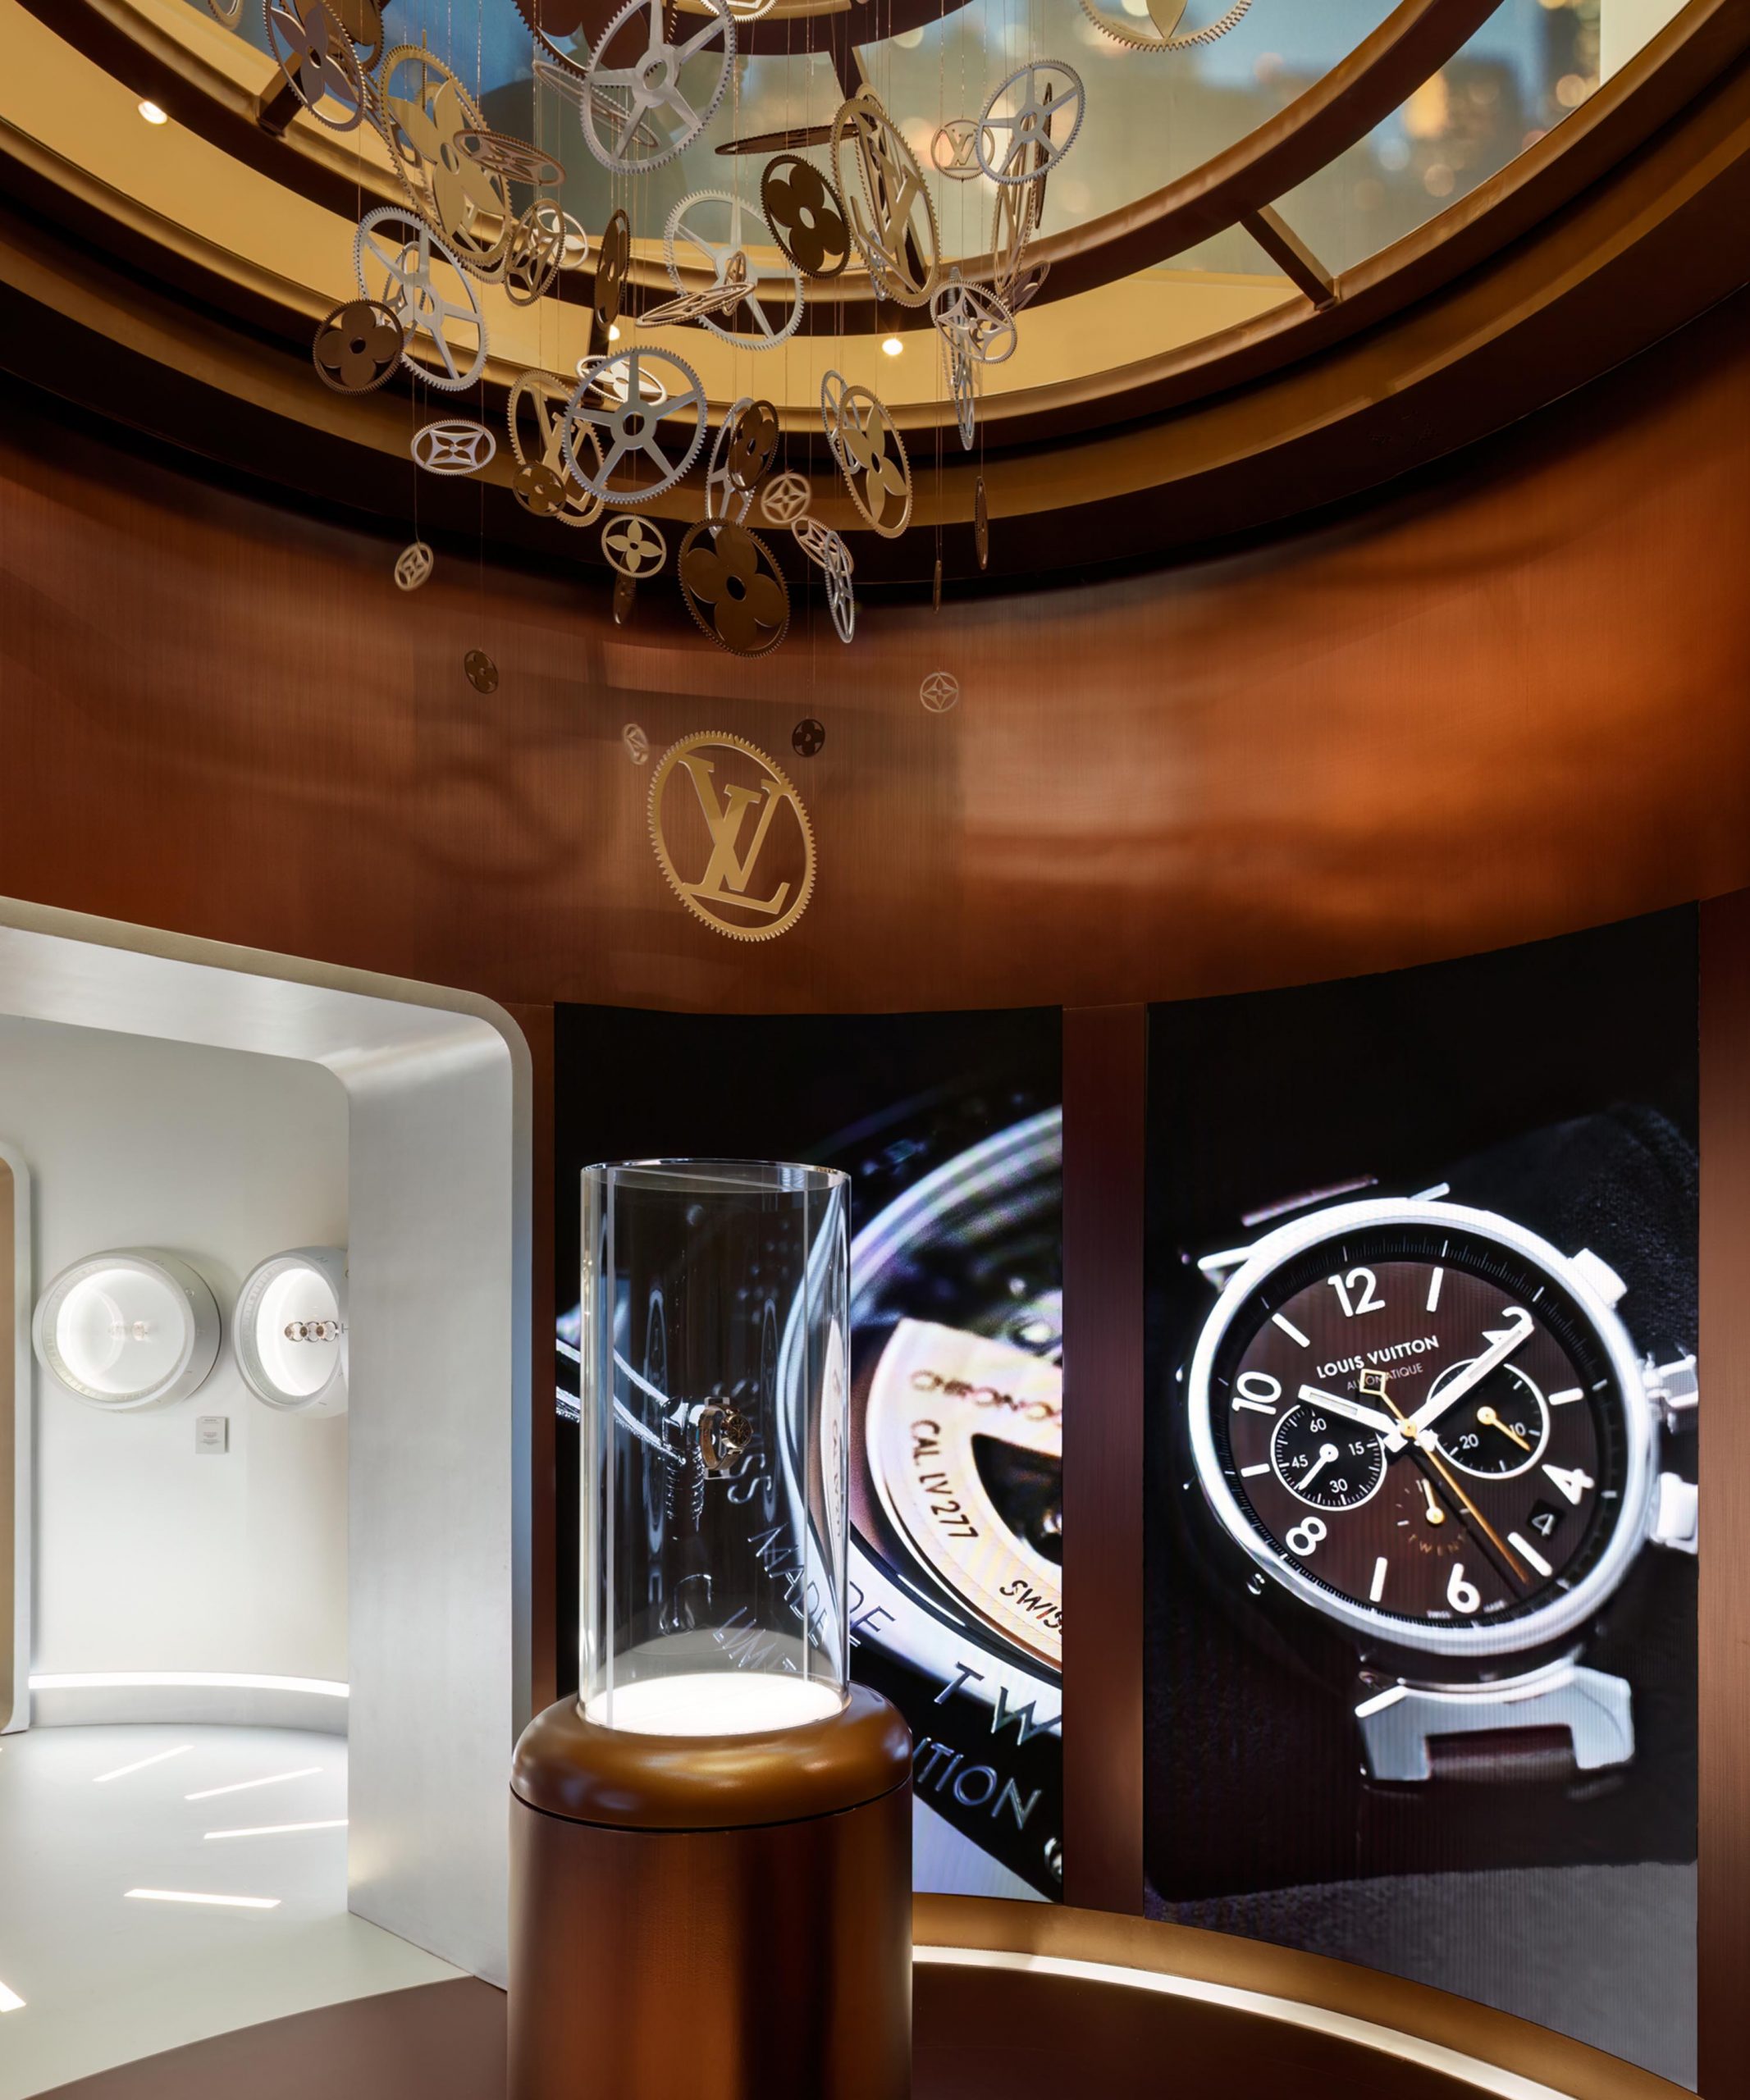 Louis Vuitton unveils new retrospective of its Tambour Watch at South Coast  Plaza